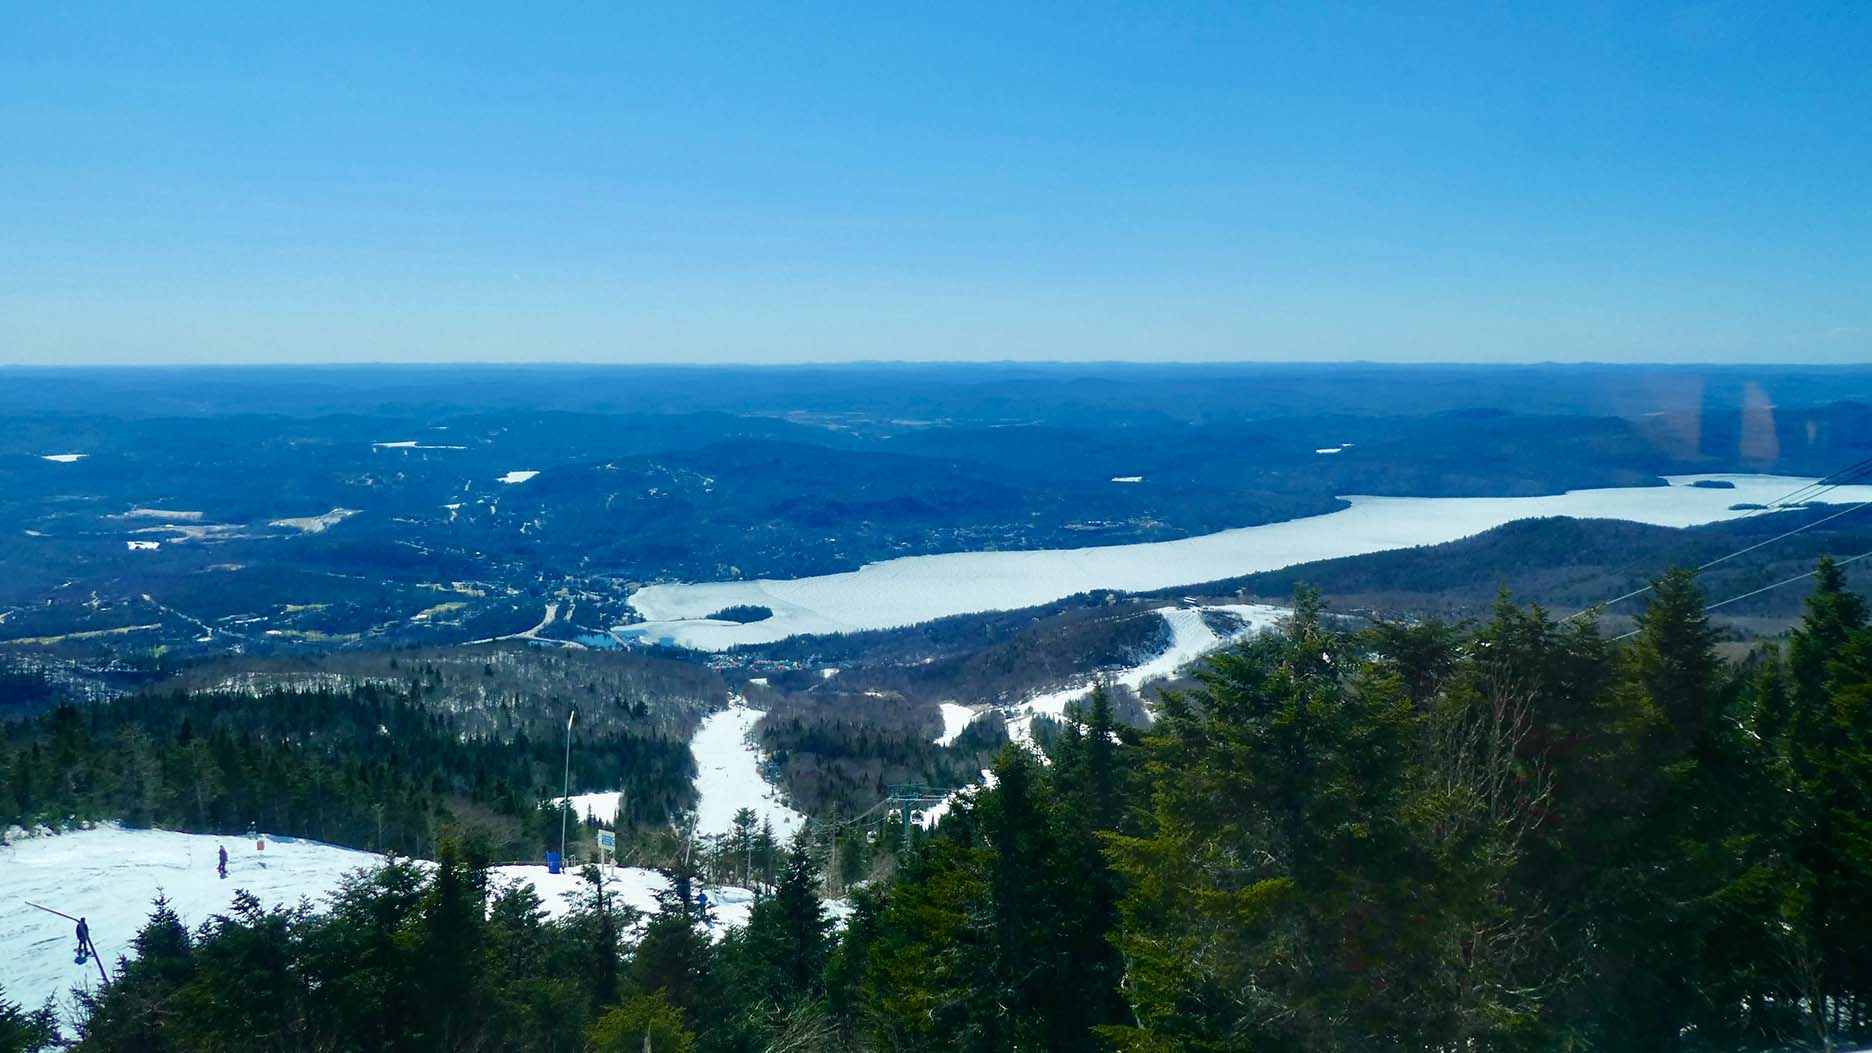 tremblant at the end of winter